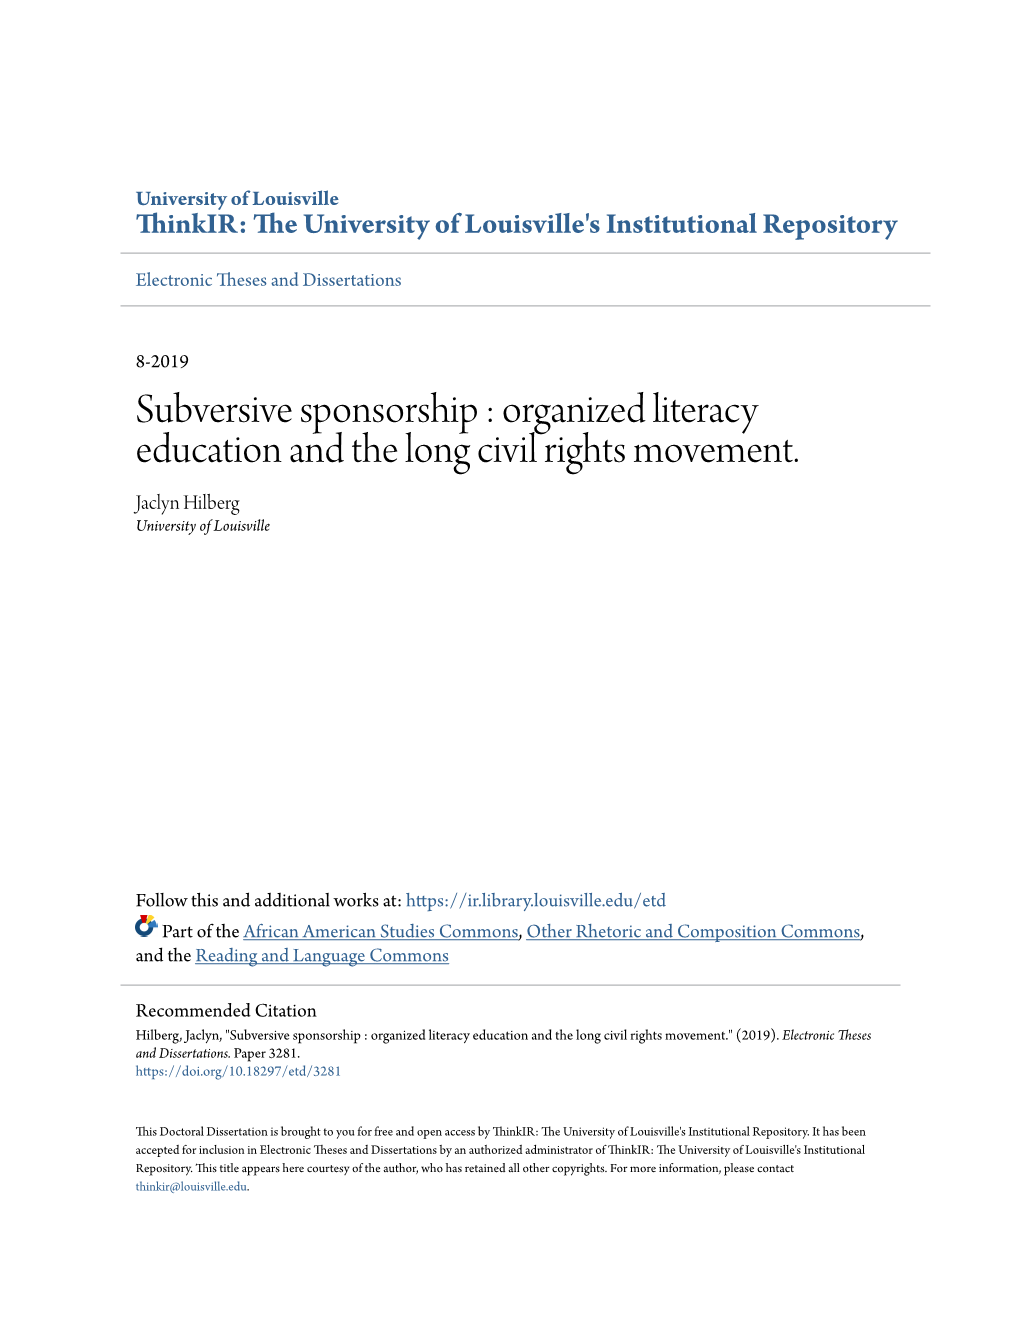 Organized Literacy Education and the Long Civil Rights Movement. Jaclyn Hilberg University of Louisville